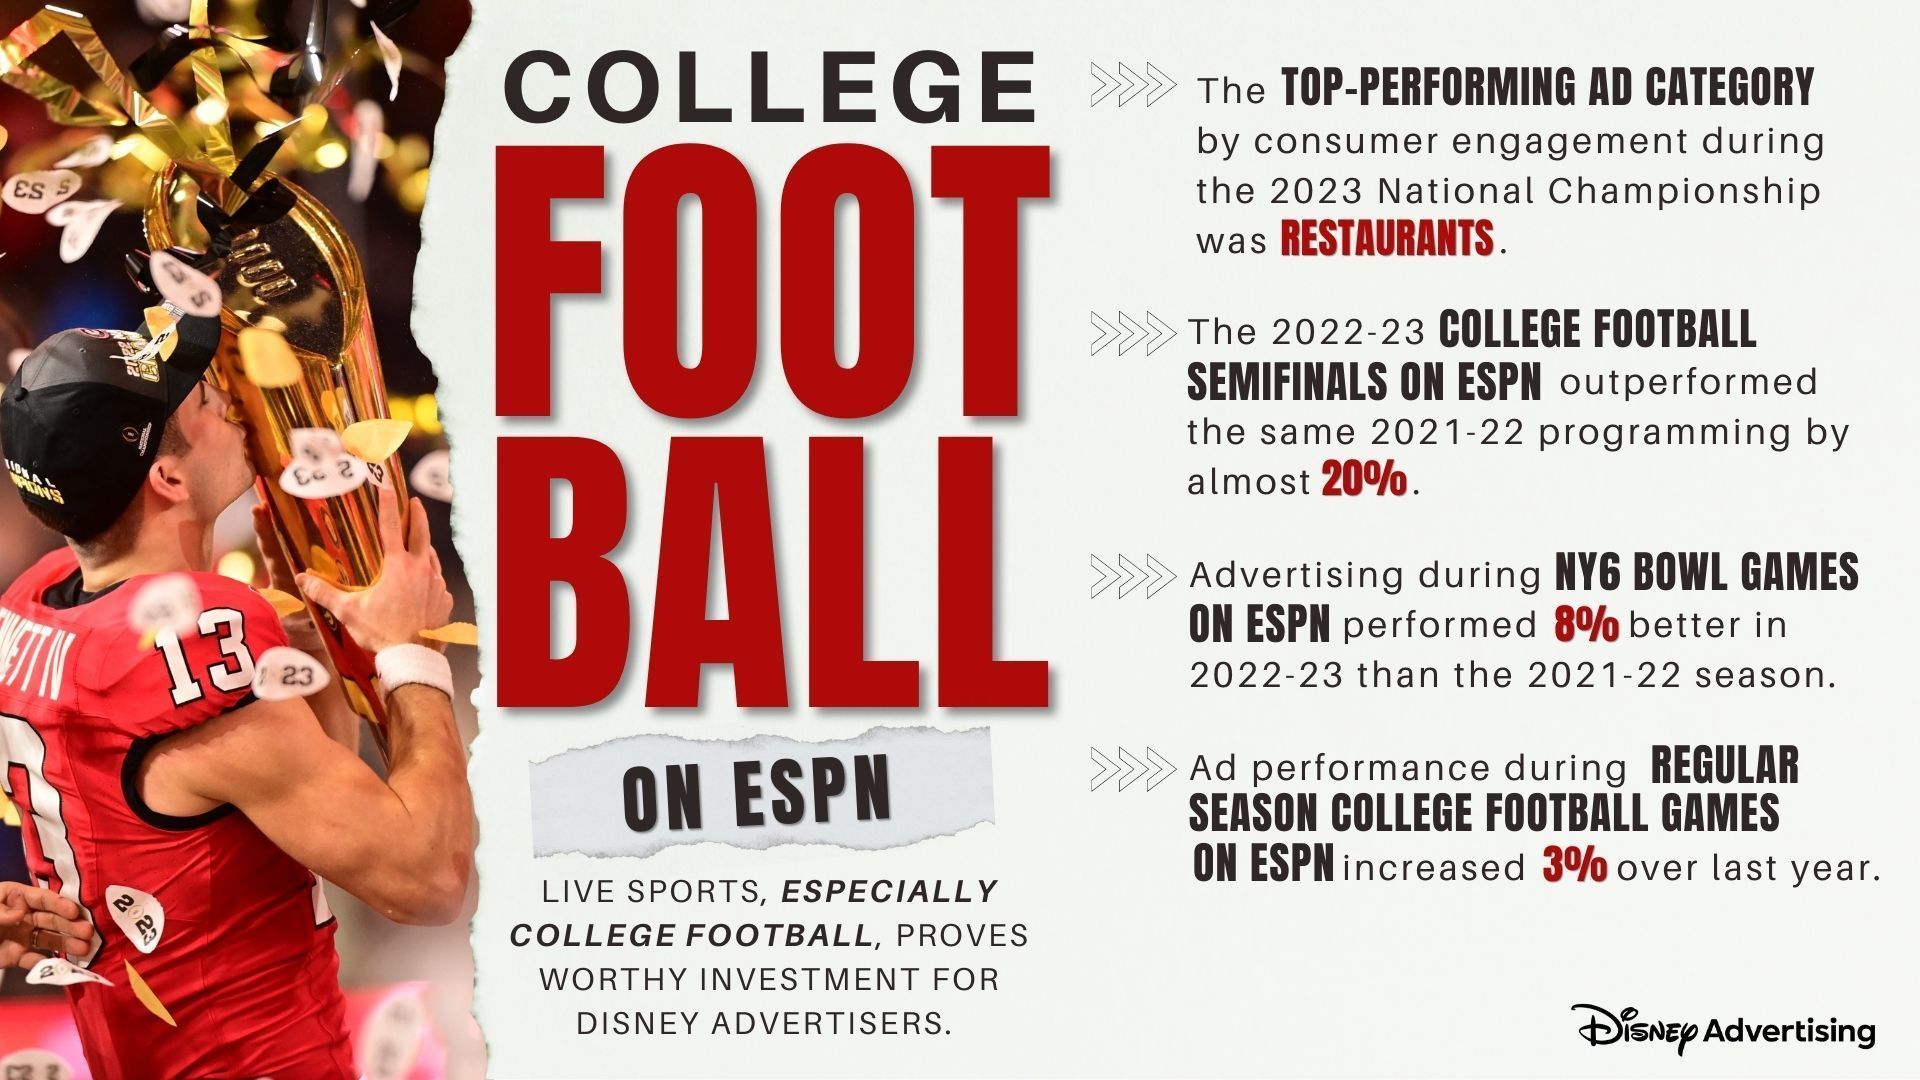 Thrilling College Football Postseason Delivers for Disney Advertisers